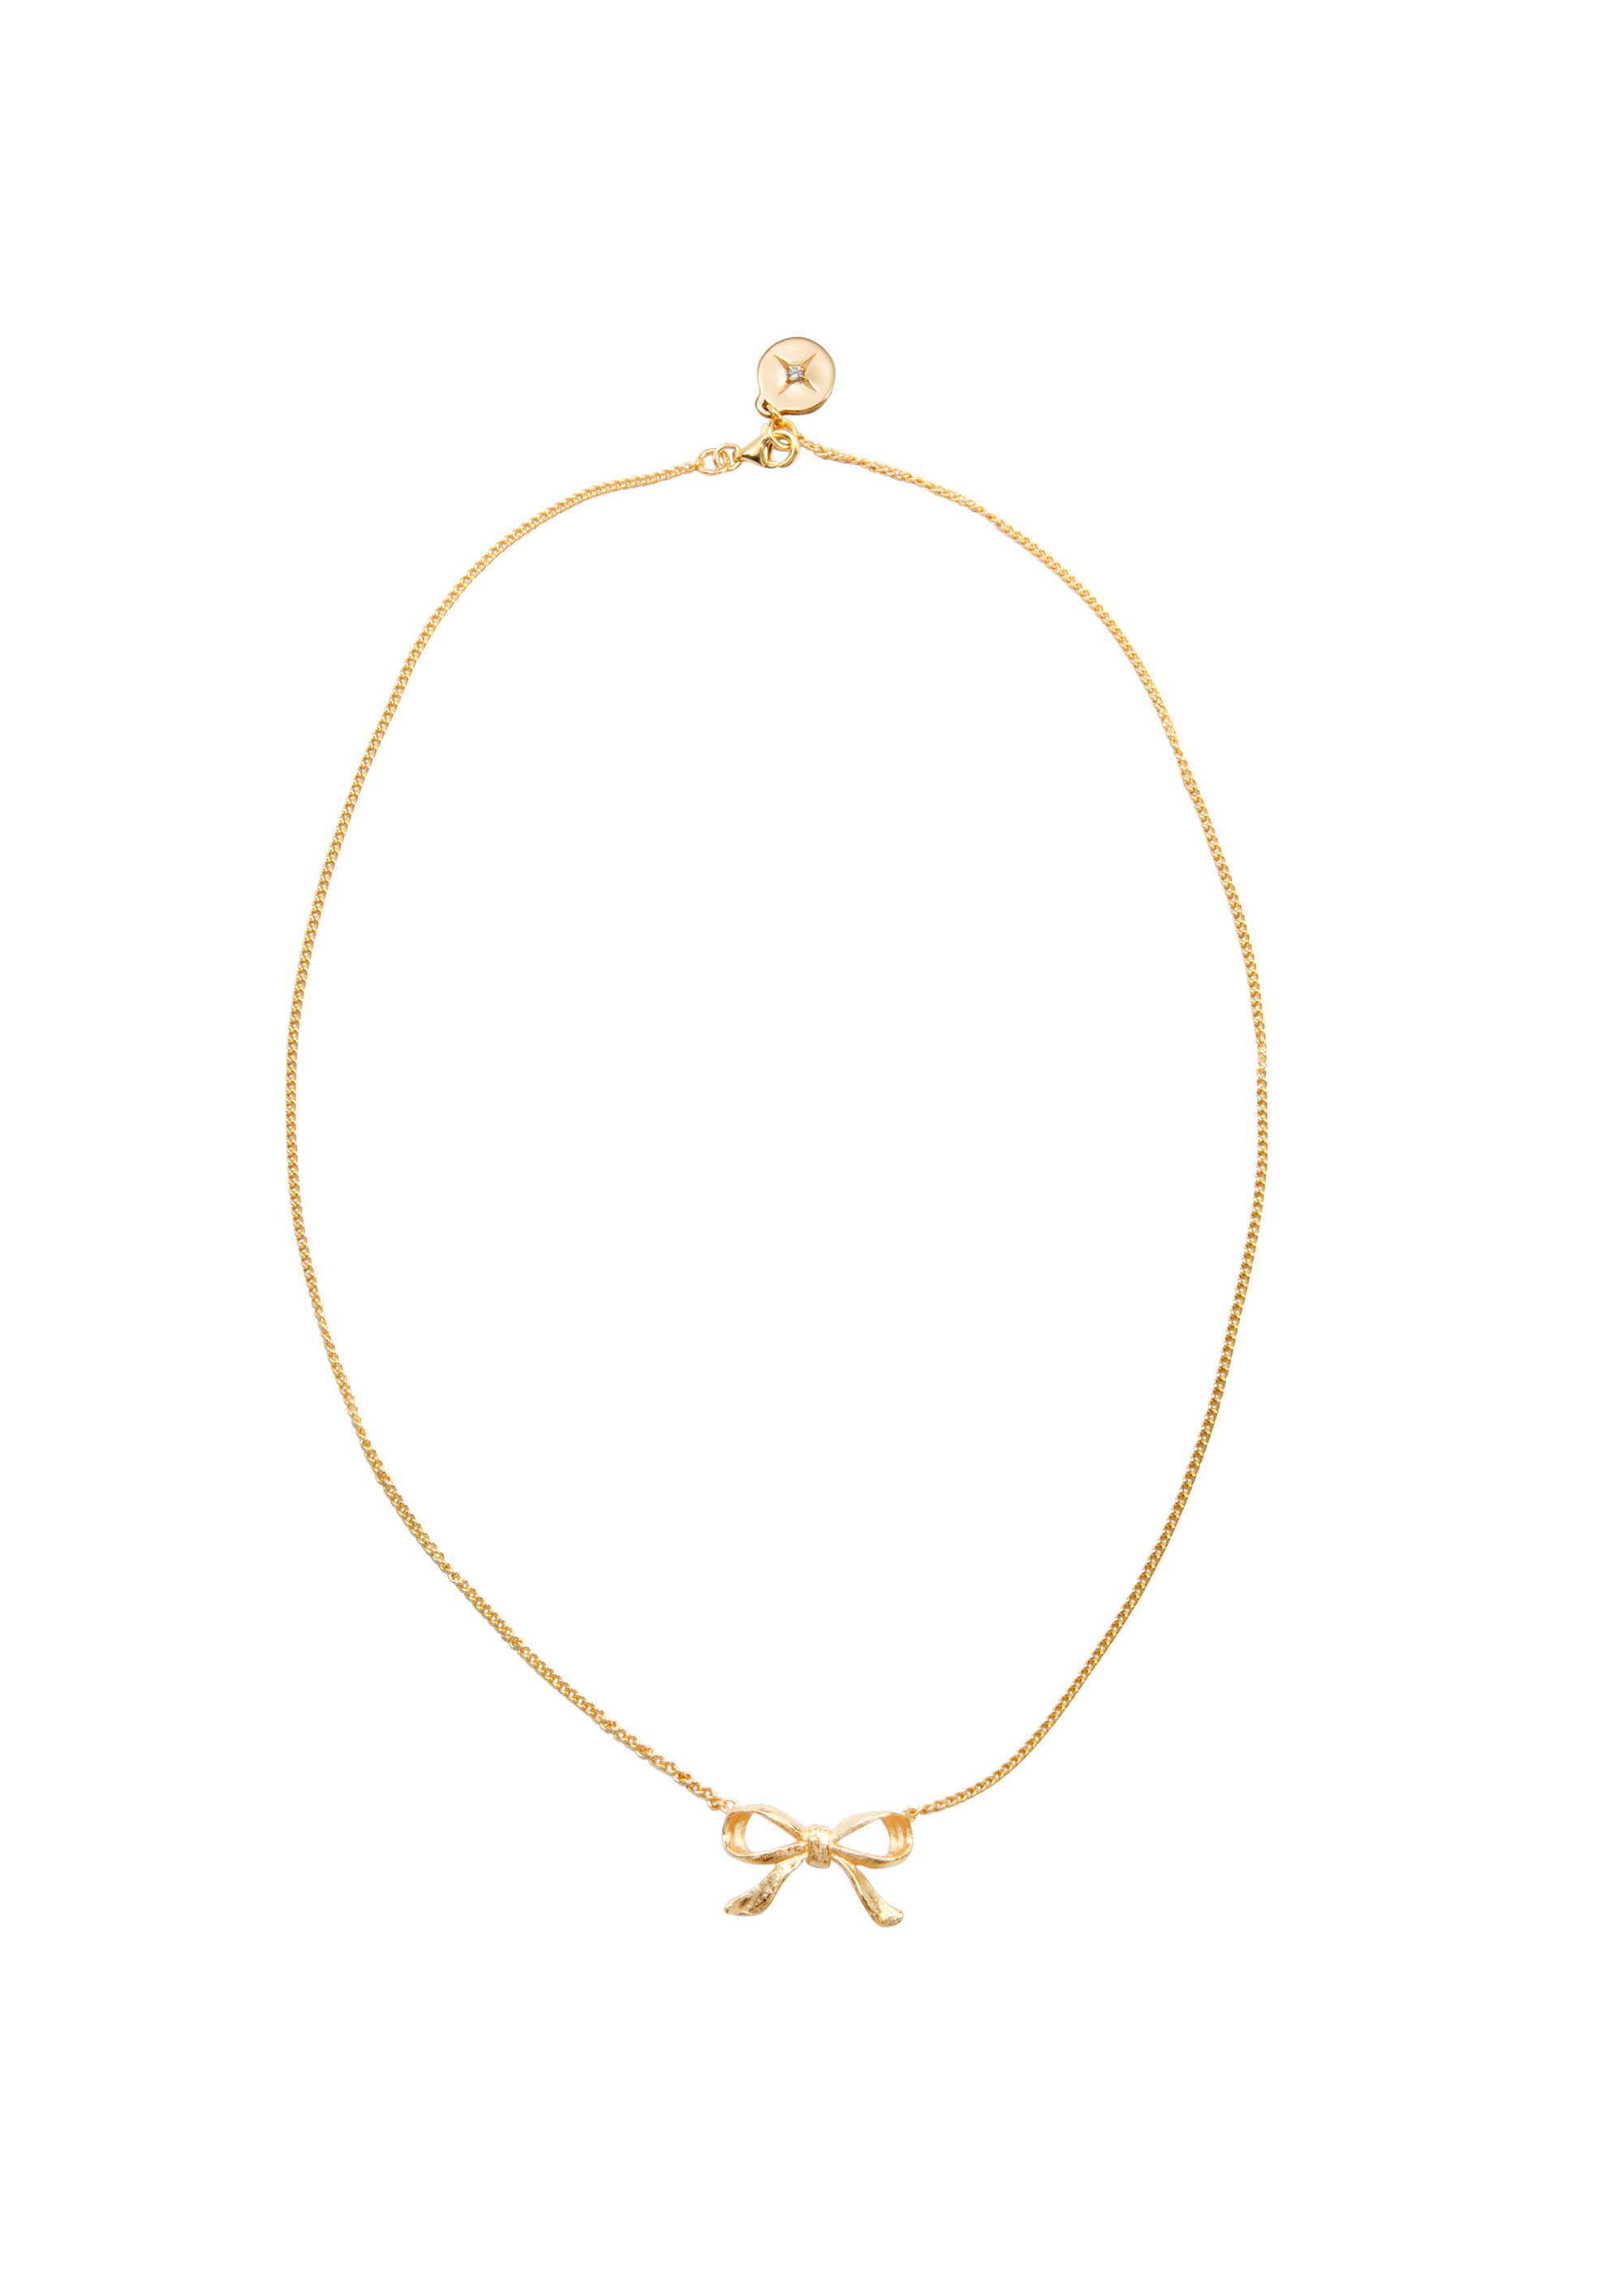 BOW PEEP NECKLACE GOLD